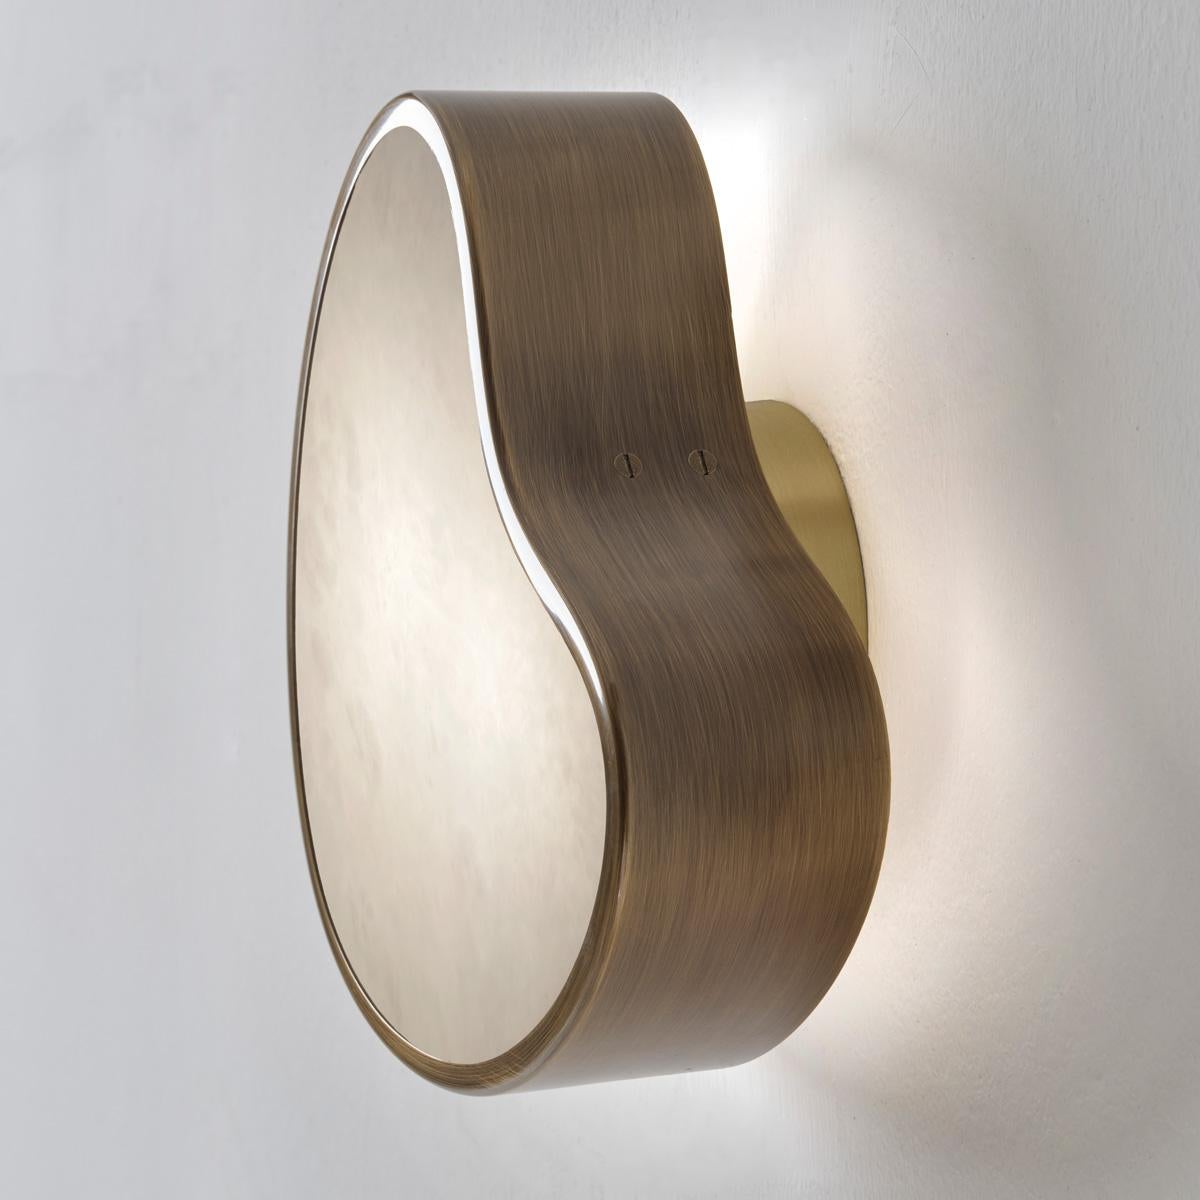 Cuore Wall Light by Gaspare Asaro. Backlit Version. Sand White Finish For Sale 2